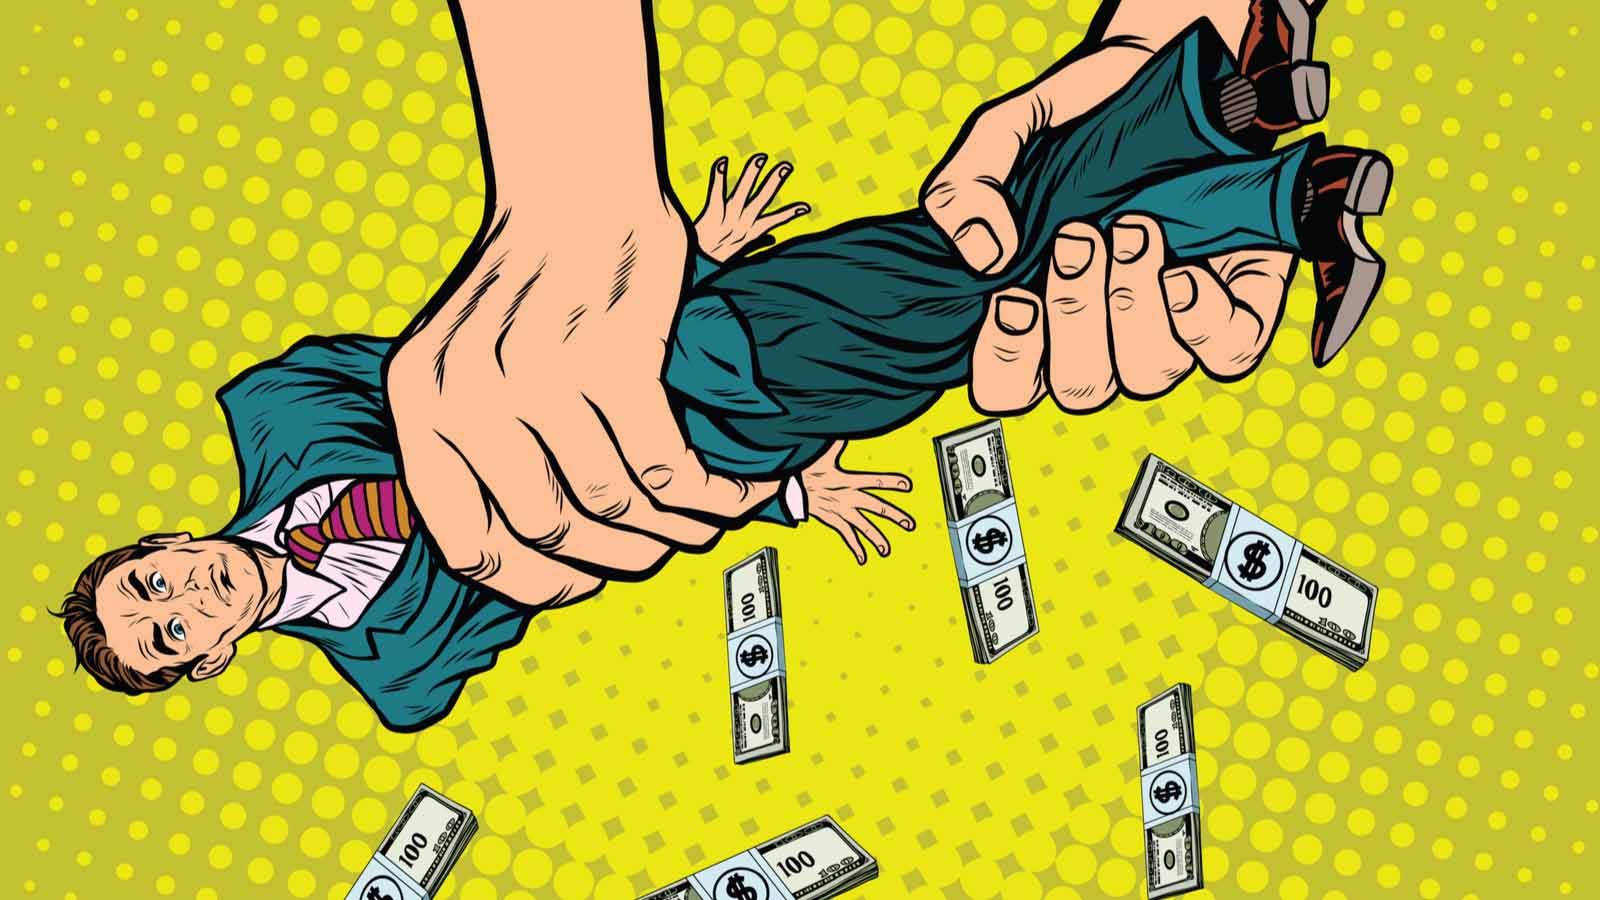 OTIC stock illustration of a person wringing out a business man on a yellow cartoon backdrop with dollar bills falling, ATER is facing a short squeeze (again)